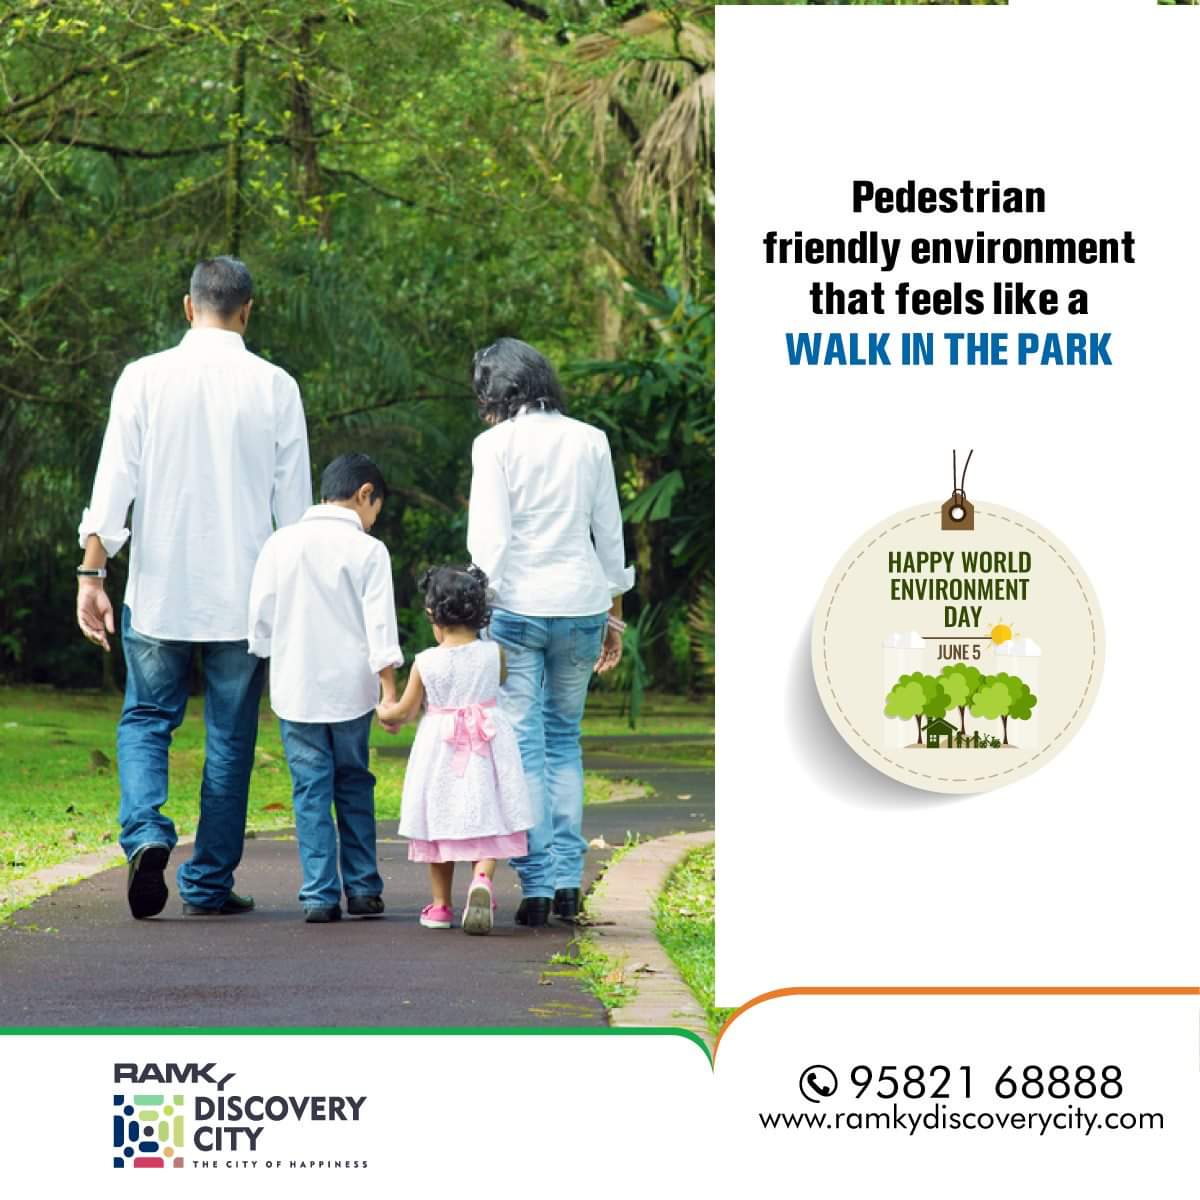 When your #YourHomeIsHere on a Ramky property you’re assured a luxurious lifestyle.
Our pedestrian-friendly communities enable residents to walk safely within the complex amidst intricately landscaped gardens.
Wishing one & all Happy
#WorldEnvironmentDay2019 #BeatAirPollution